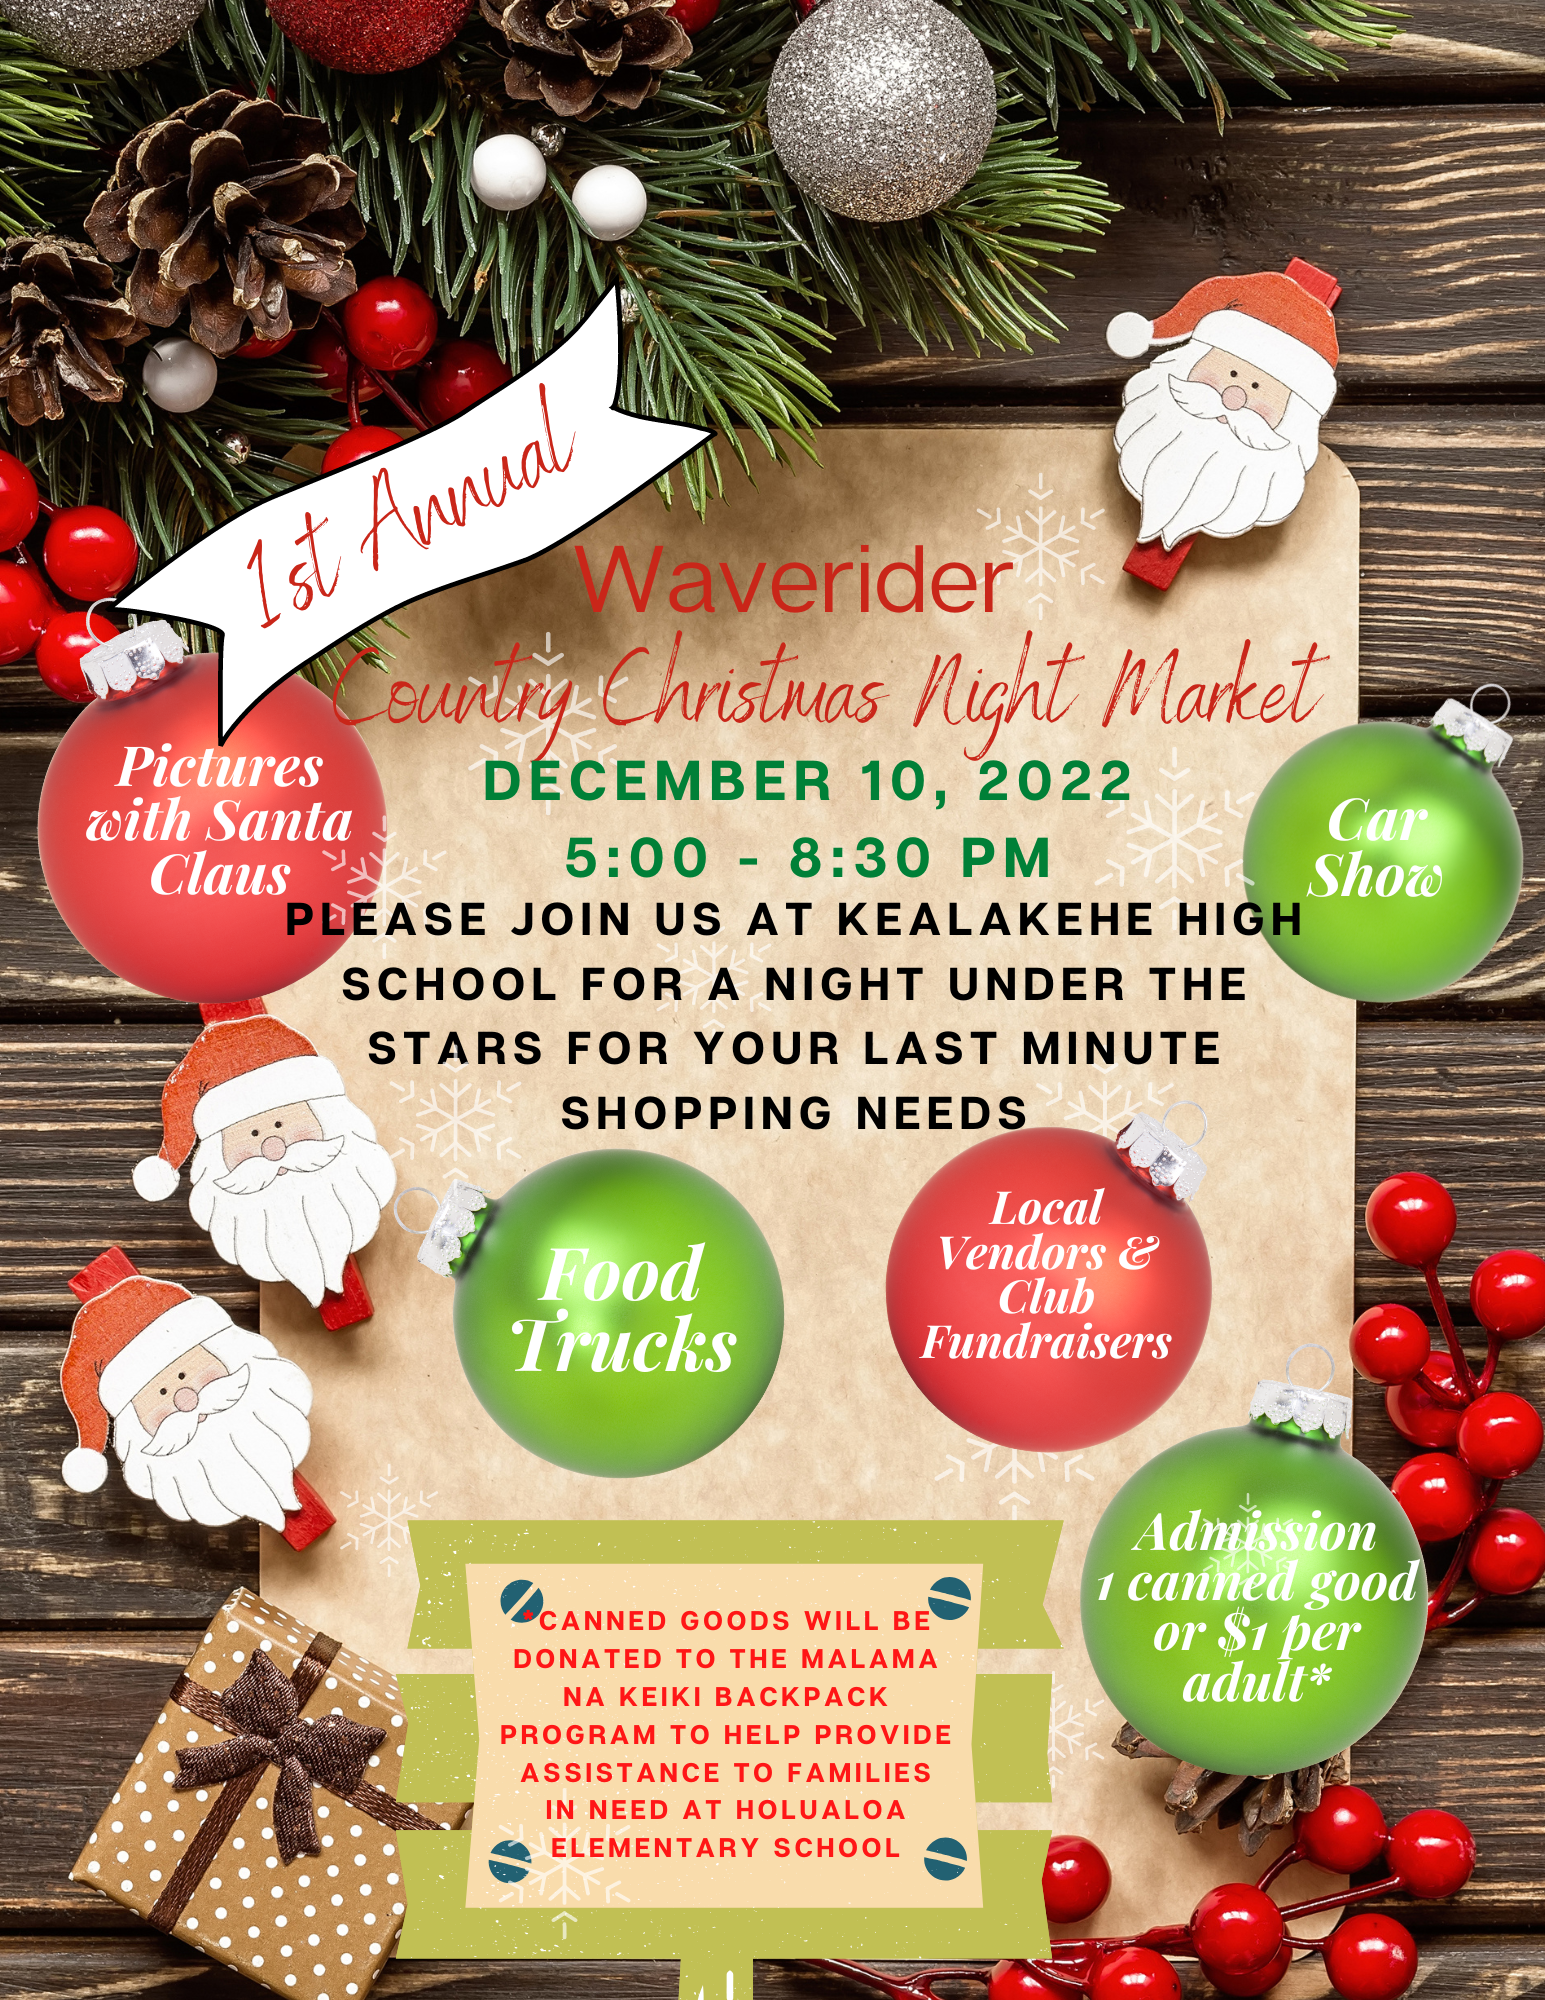 1st Annual Waverider Country Christmas Night Market